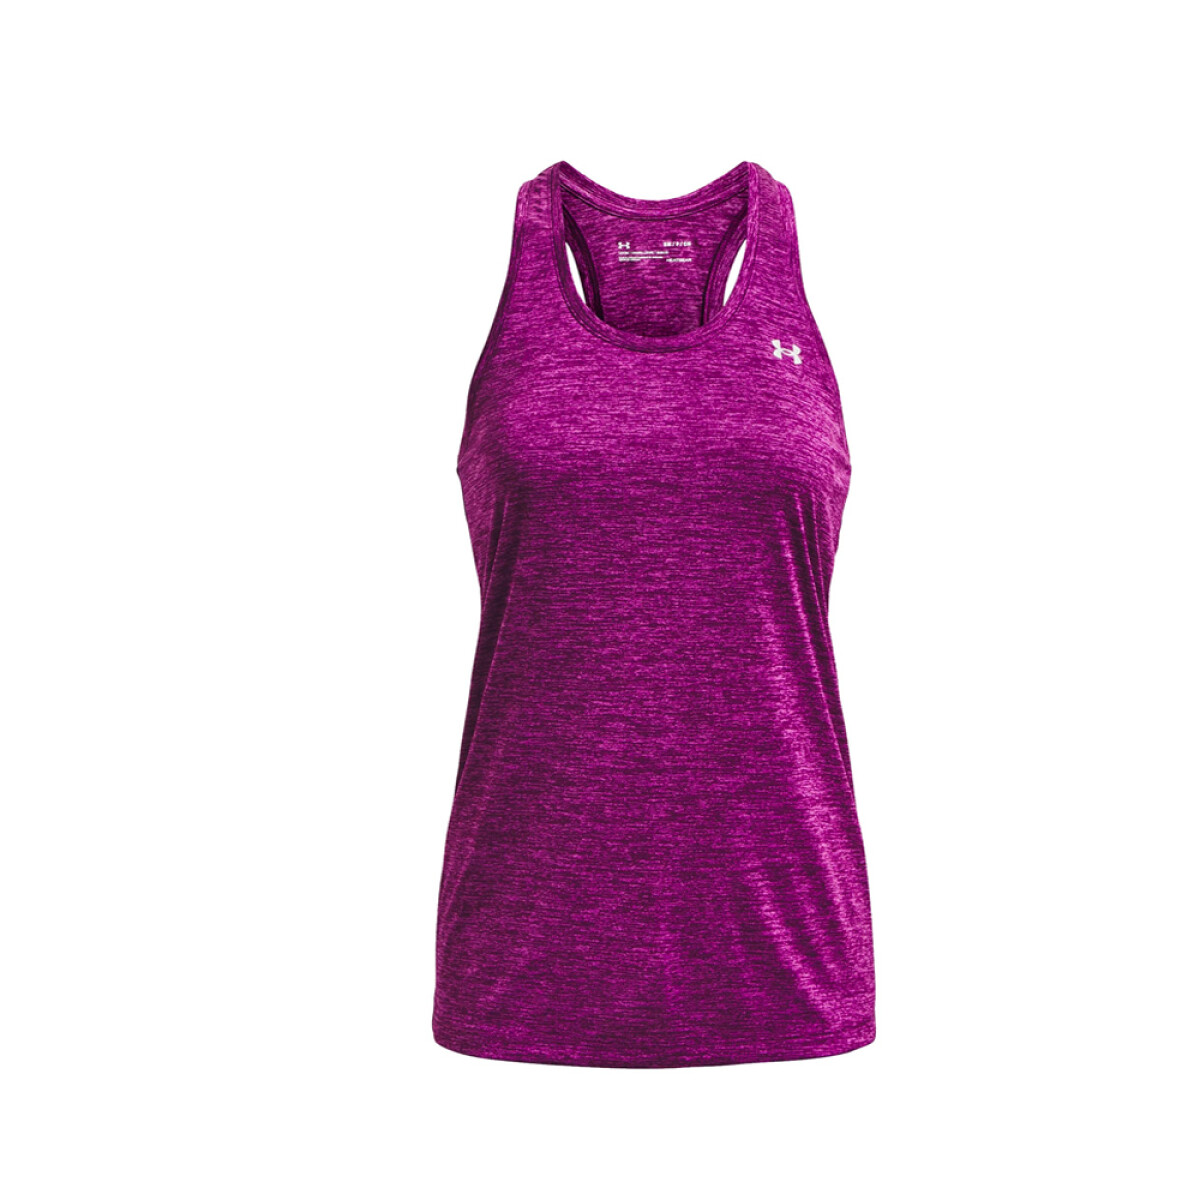 MUSCULOSA UNDER ARMOUR TECH TANK - Violet 